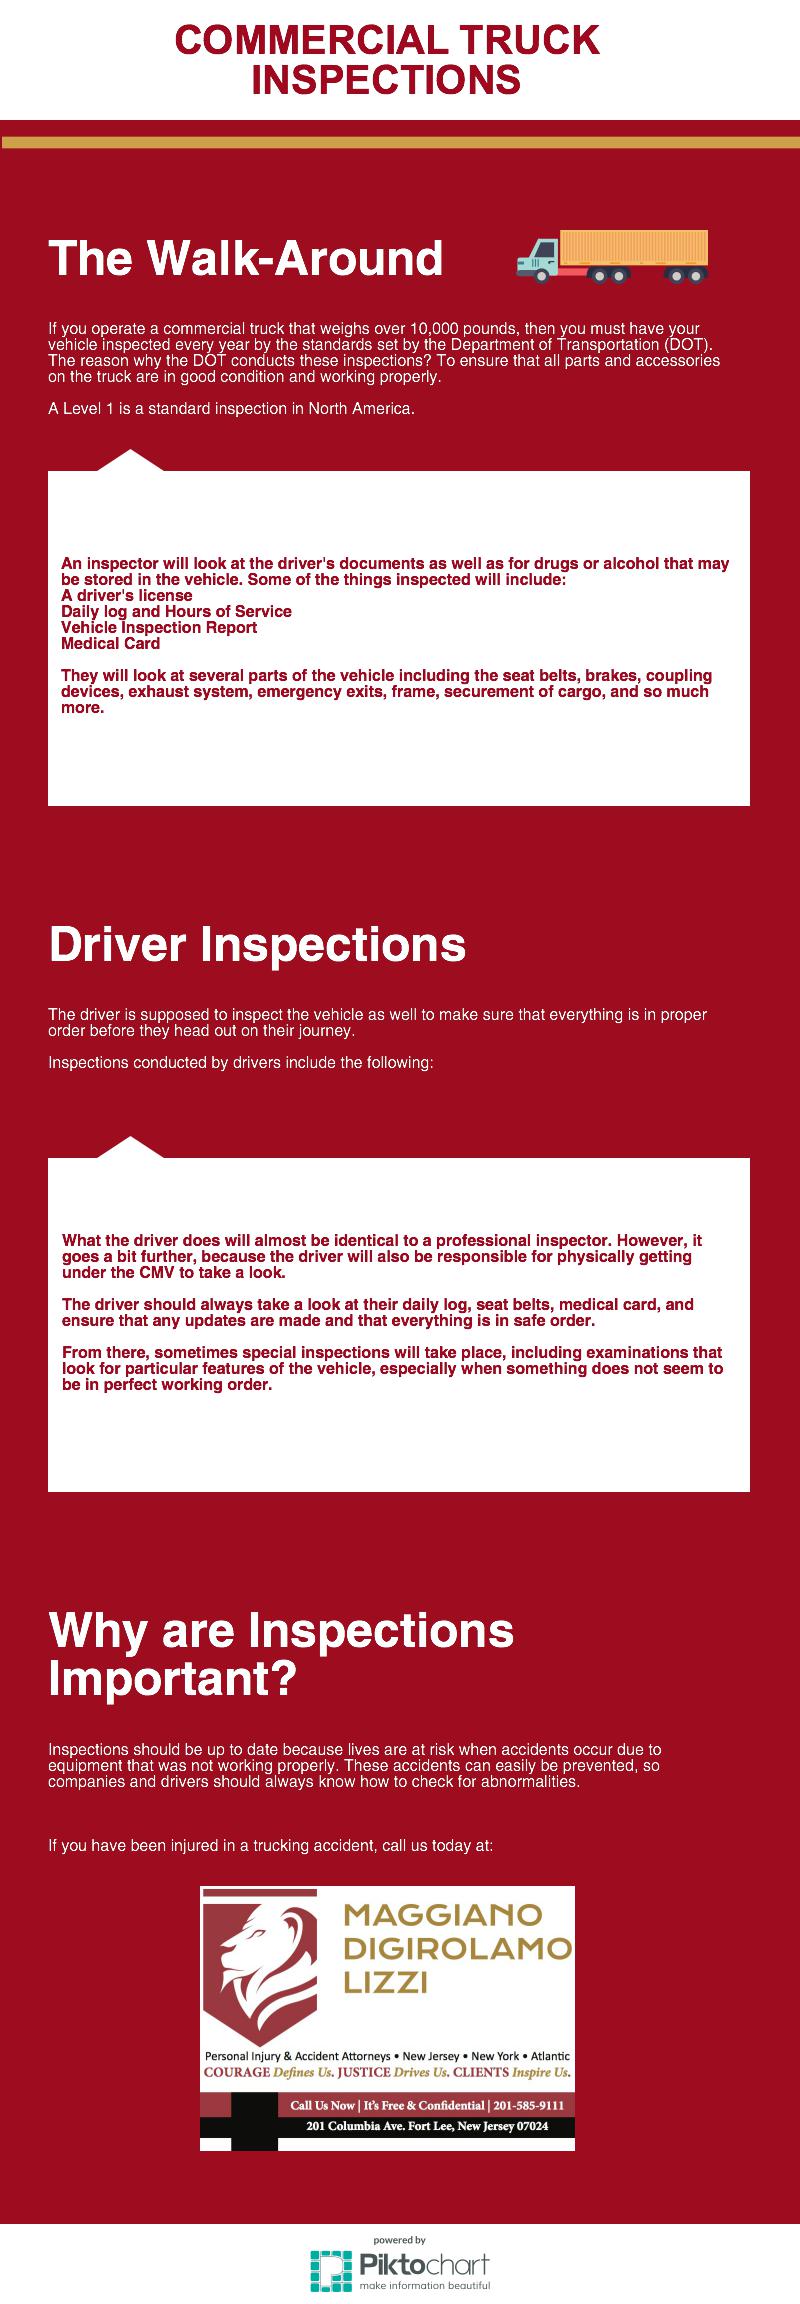 Lack of Inspections Can Lead to a Serious Truck Accident